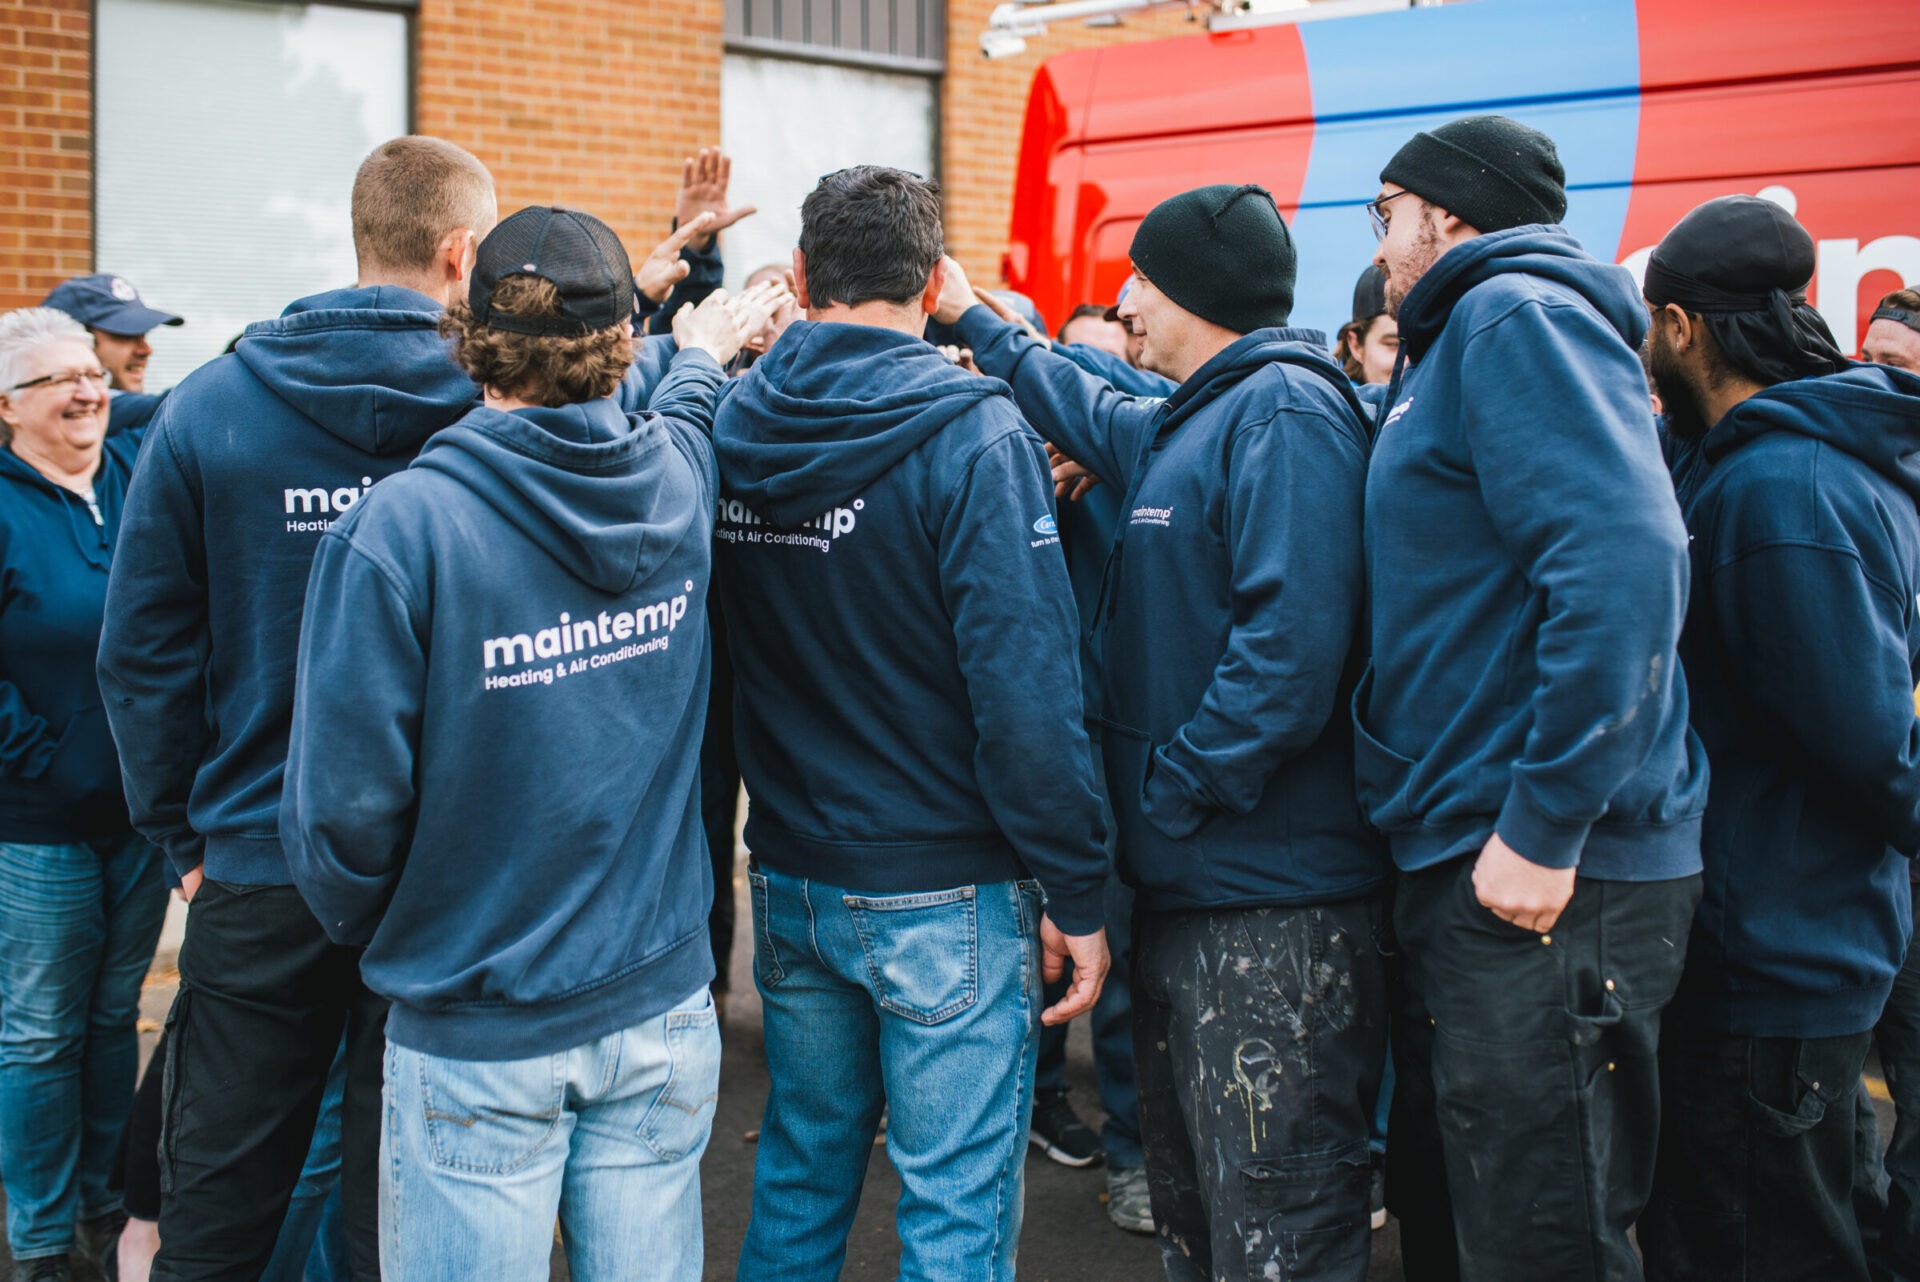 A group of people in matching blue work jackets are huddled together, with some raising their hands, possibly celebrating or team-building.